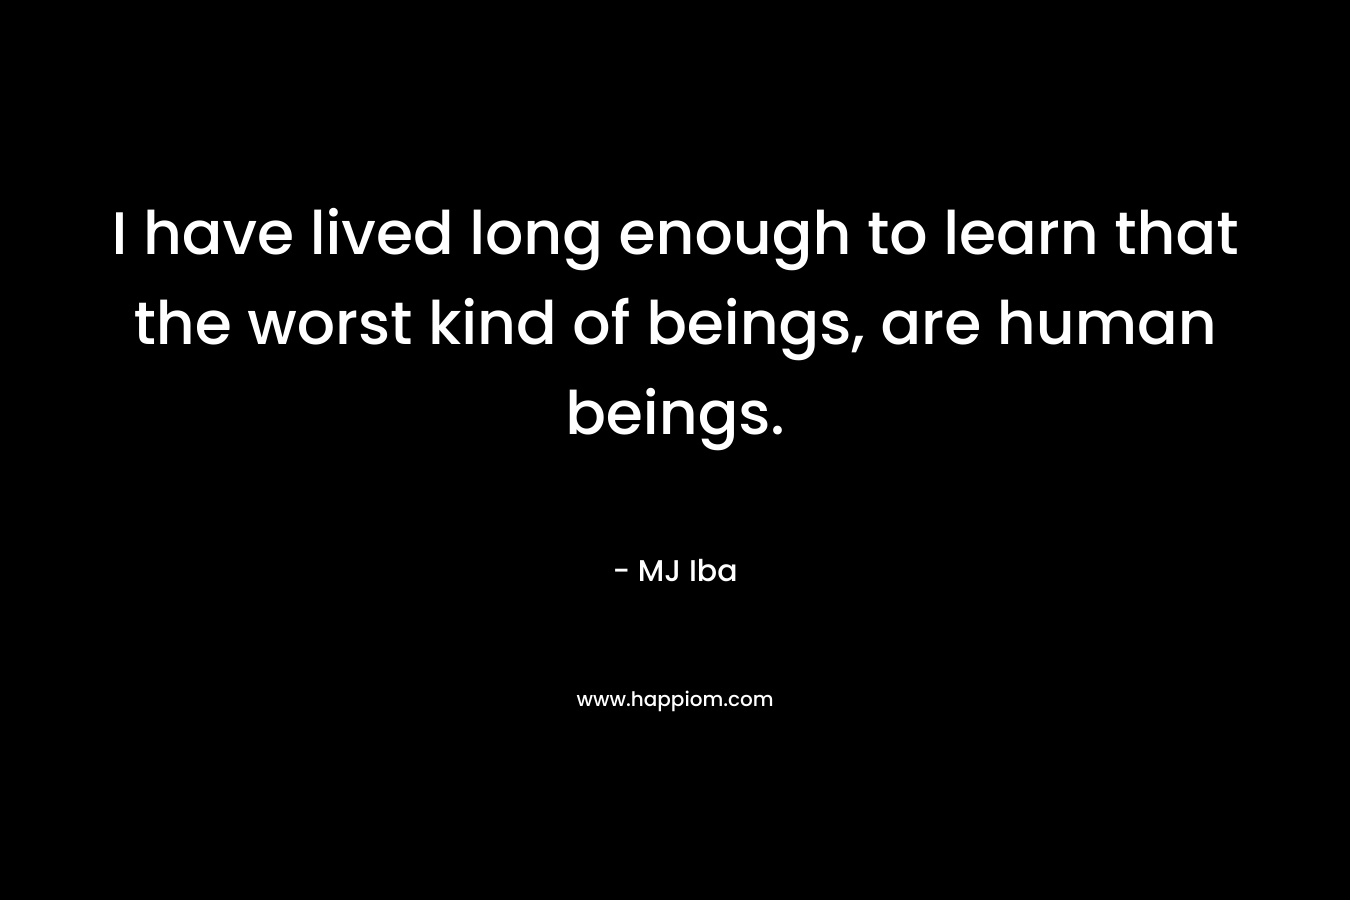 I have lived long enough to learn that the worst kind of beings, are human beings. – MJ Iba